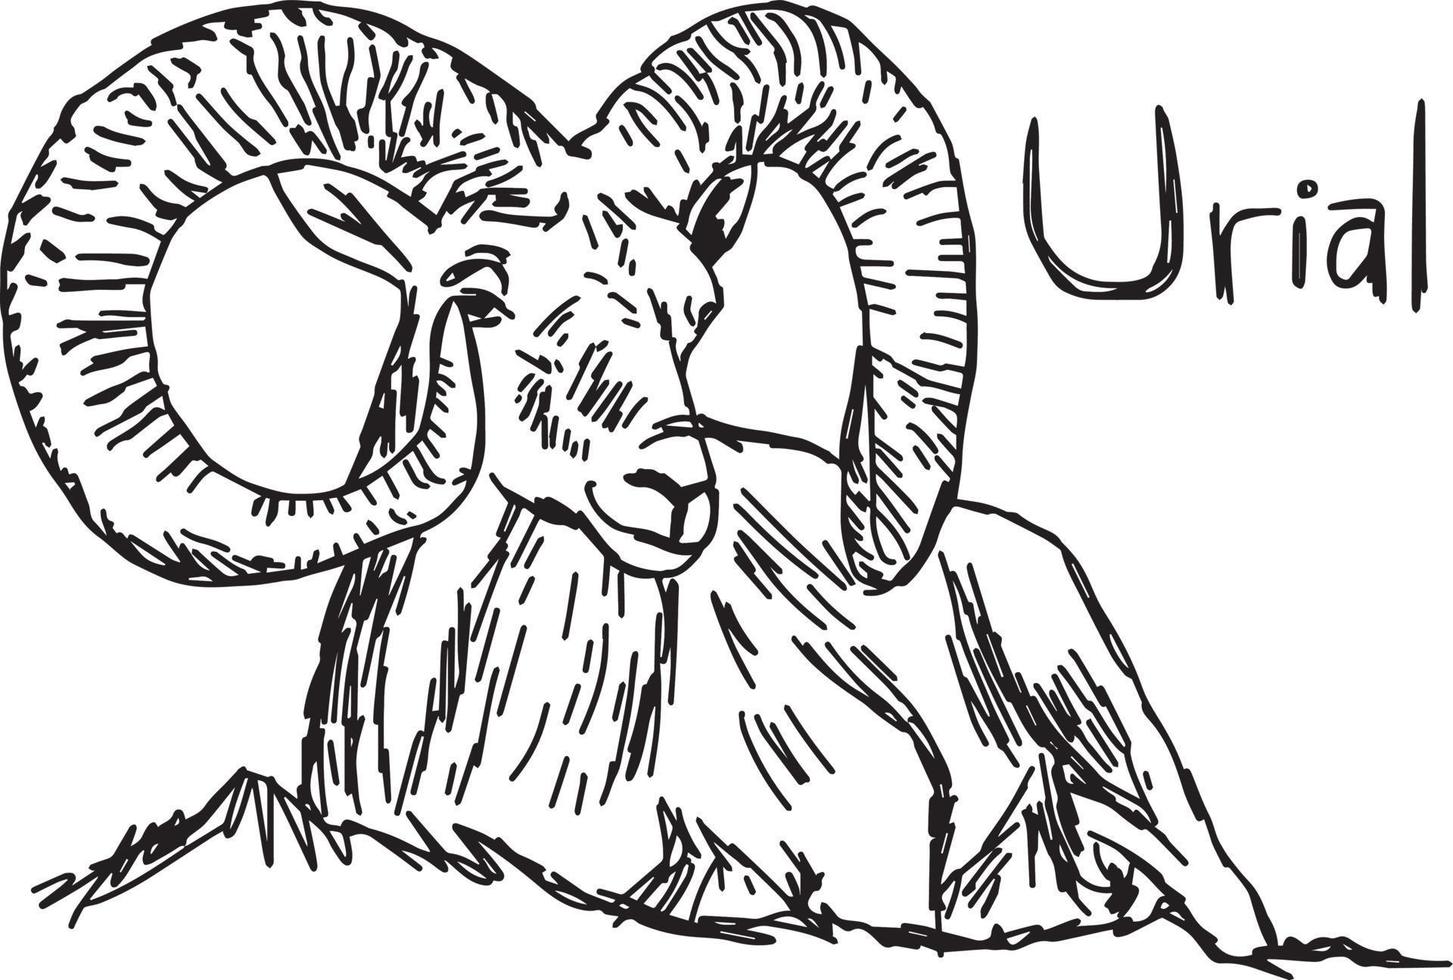 urial with beautiful horn - vector illustration sketch